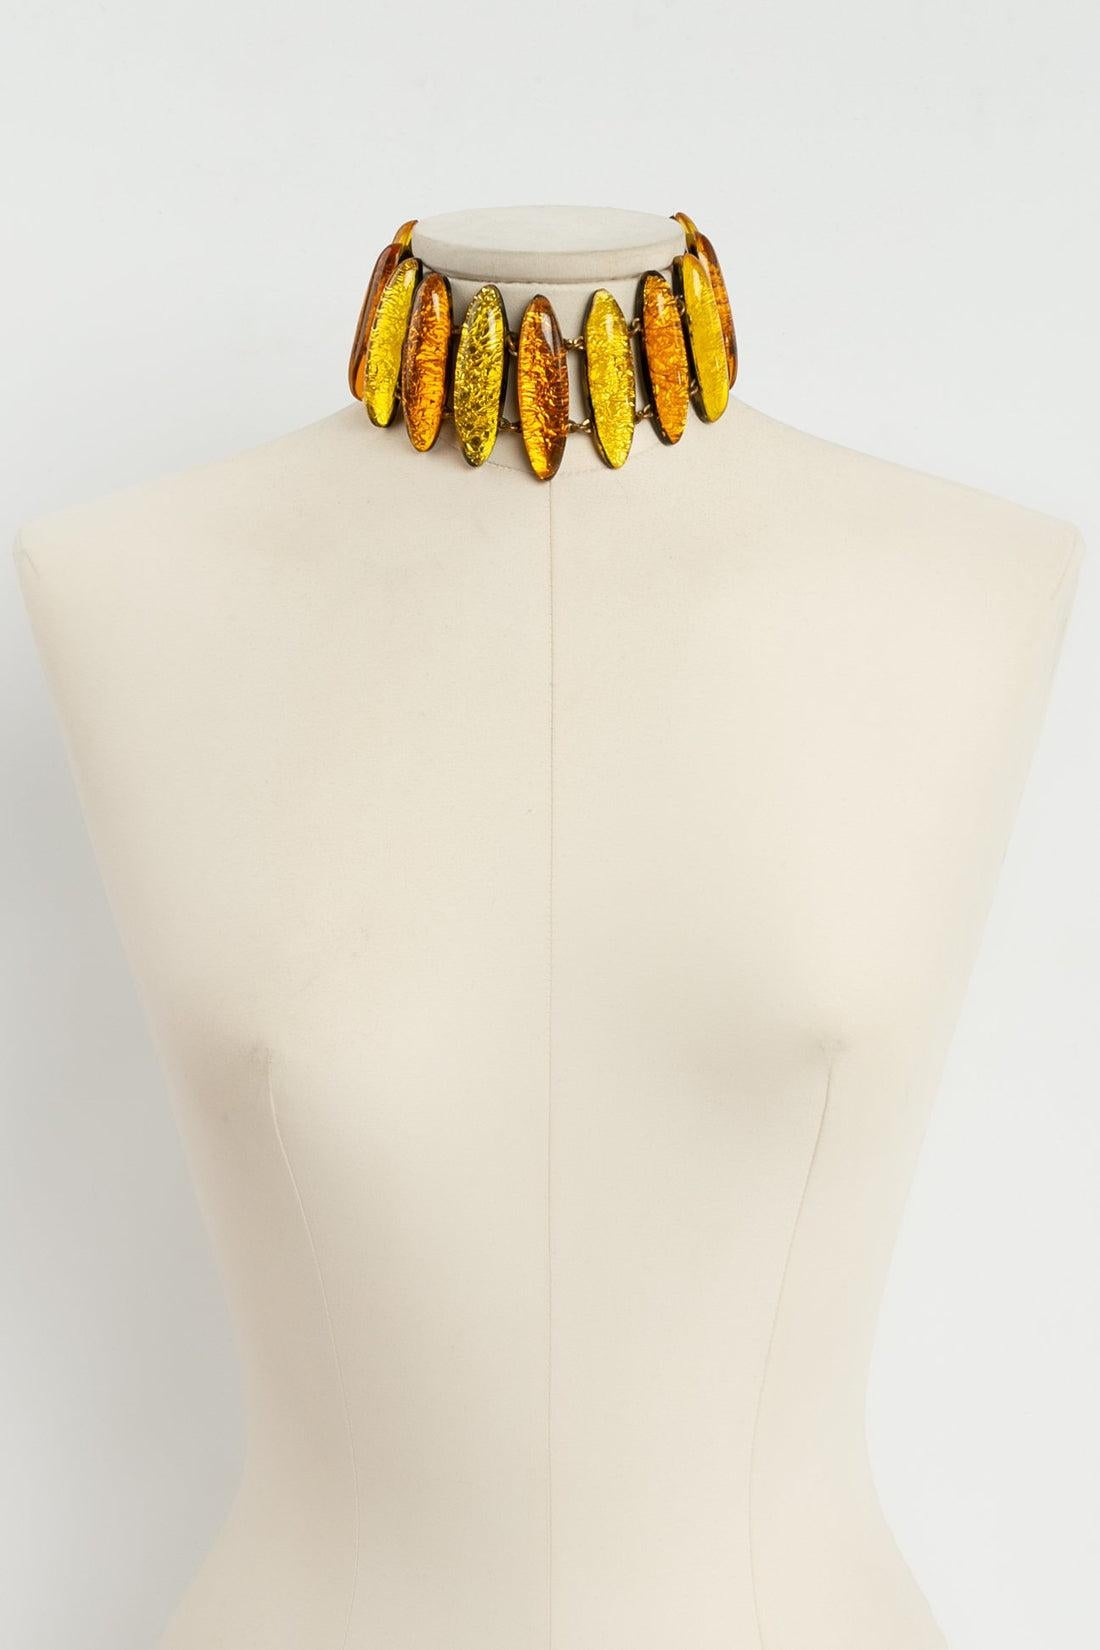 Jean Paul Gaultier - Articulated gilded metal choker paved with resin in yellow, orange and tortoise-shell colors. Signed at the tip.

Additional information: 
Dimensions: Width: 30.5 cm to 34 cm (12